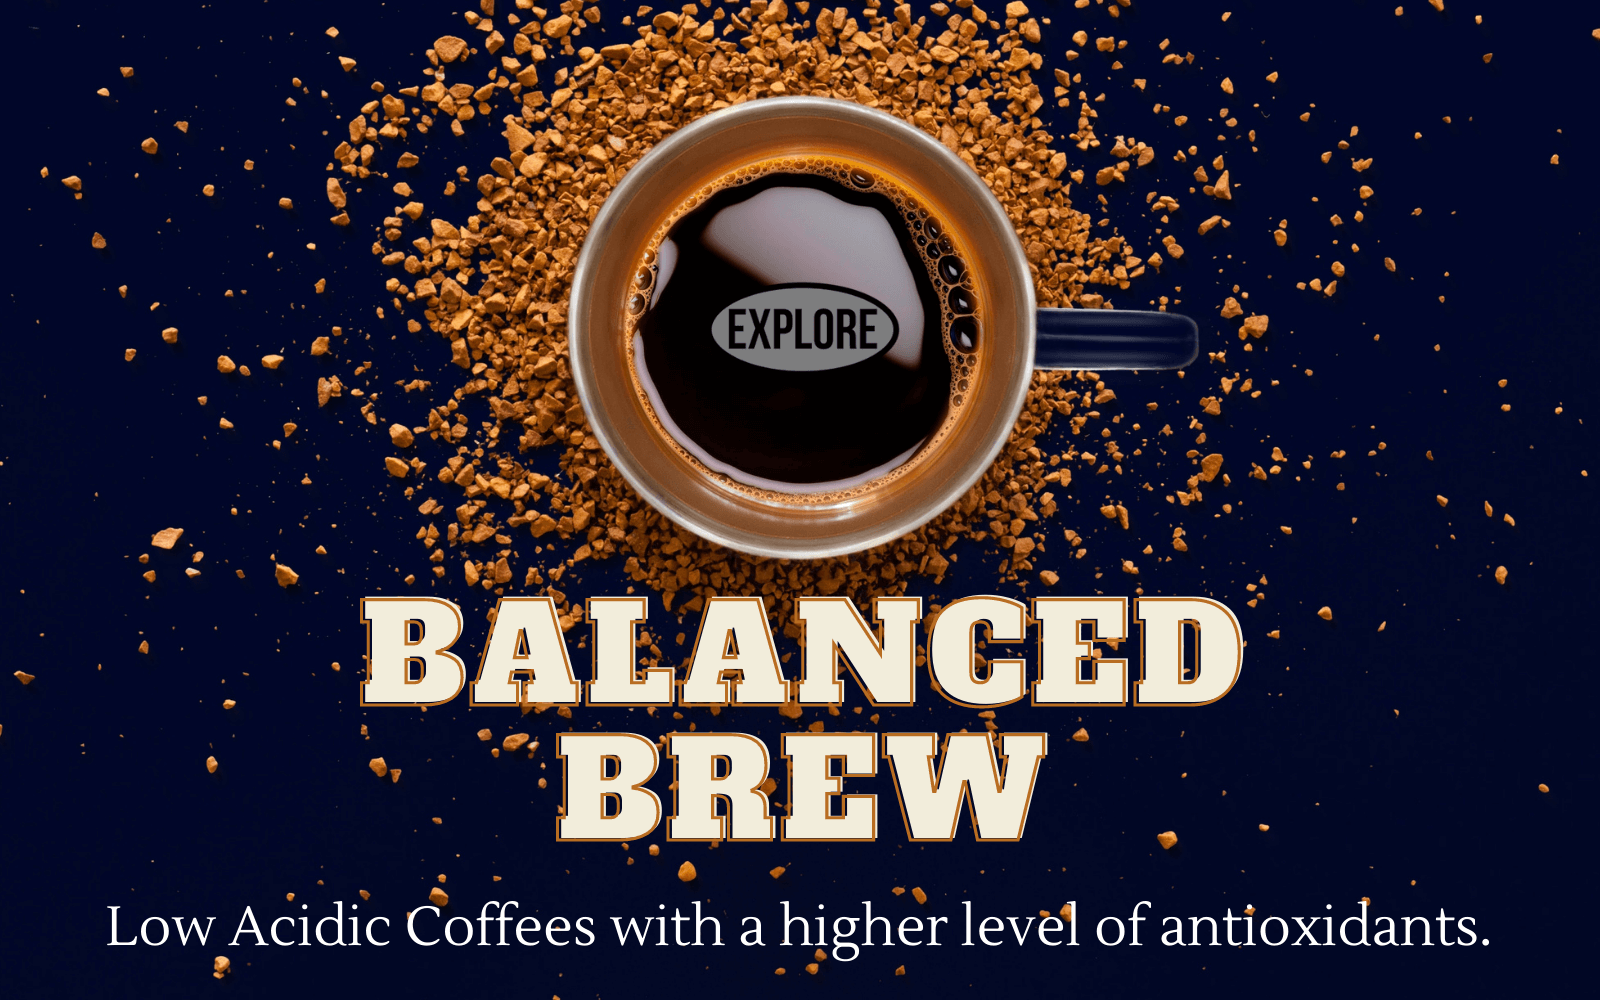 Balanced brew the perfect choice for coffee drinkers suffering from digestive issues, or those that just prefer low aciidic coffees with a higher level of antioxidants from Out Of The Grey Coffee